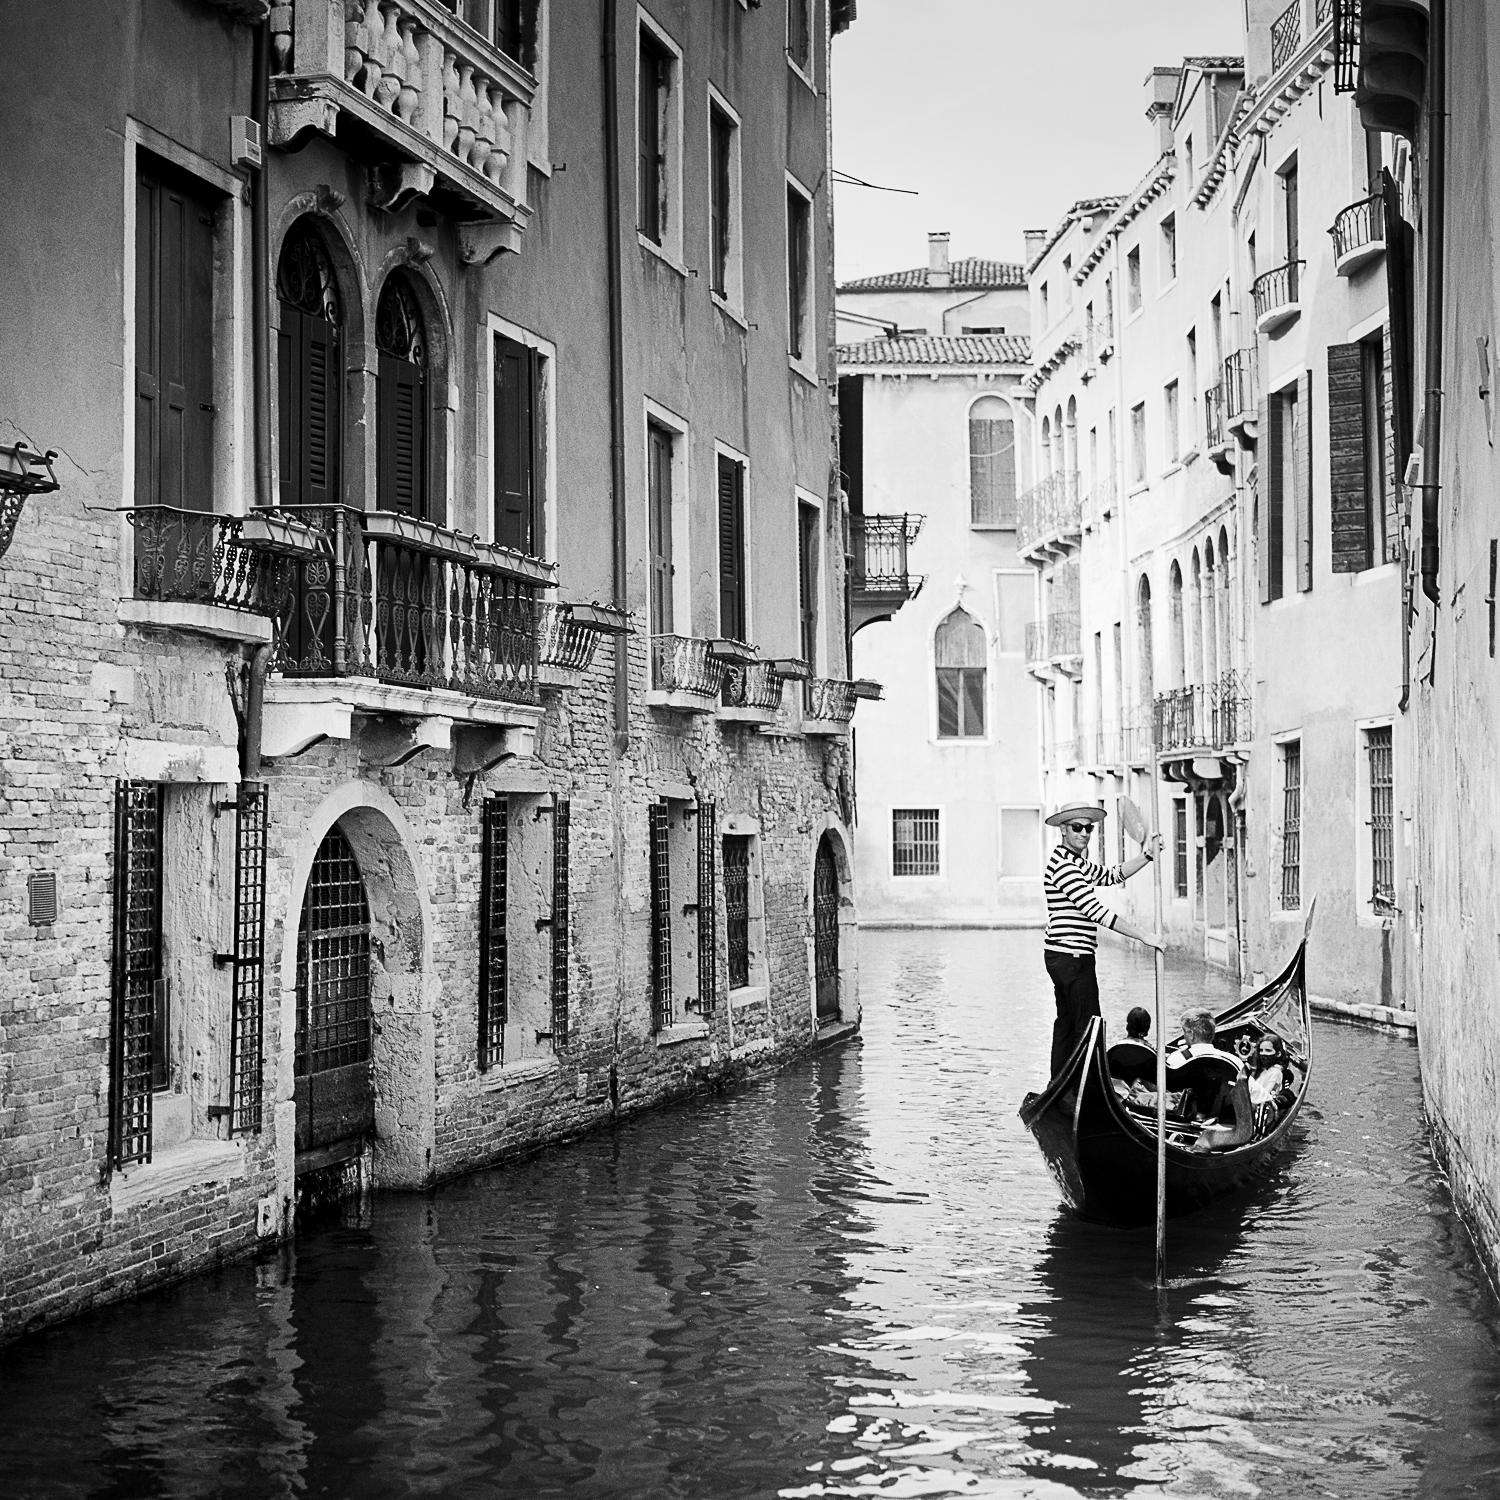 Gondoliere, Venice, Italy, black and white photography, pigment print, framed - Photograph by Gerald Berghammer